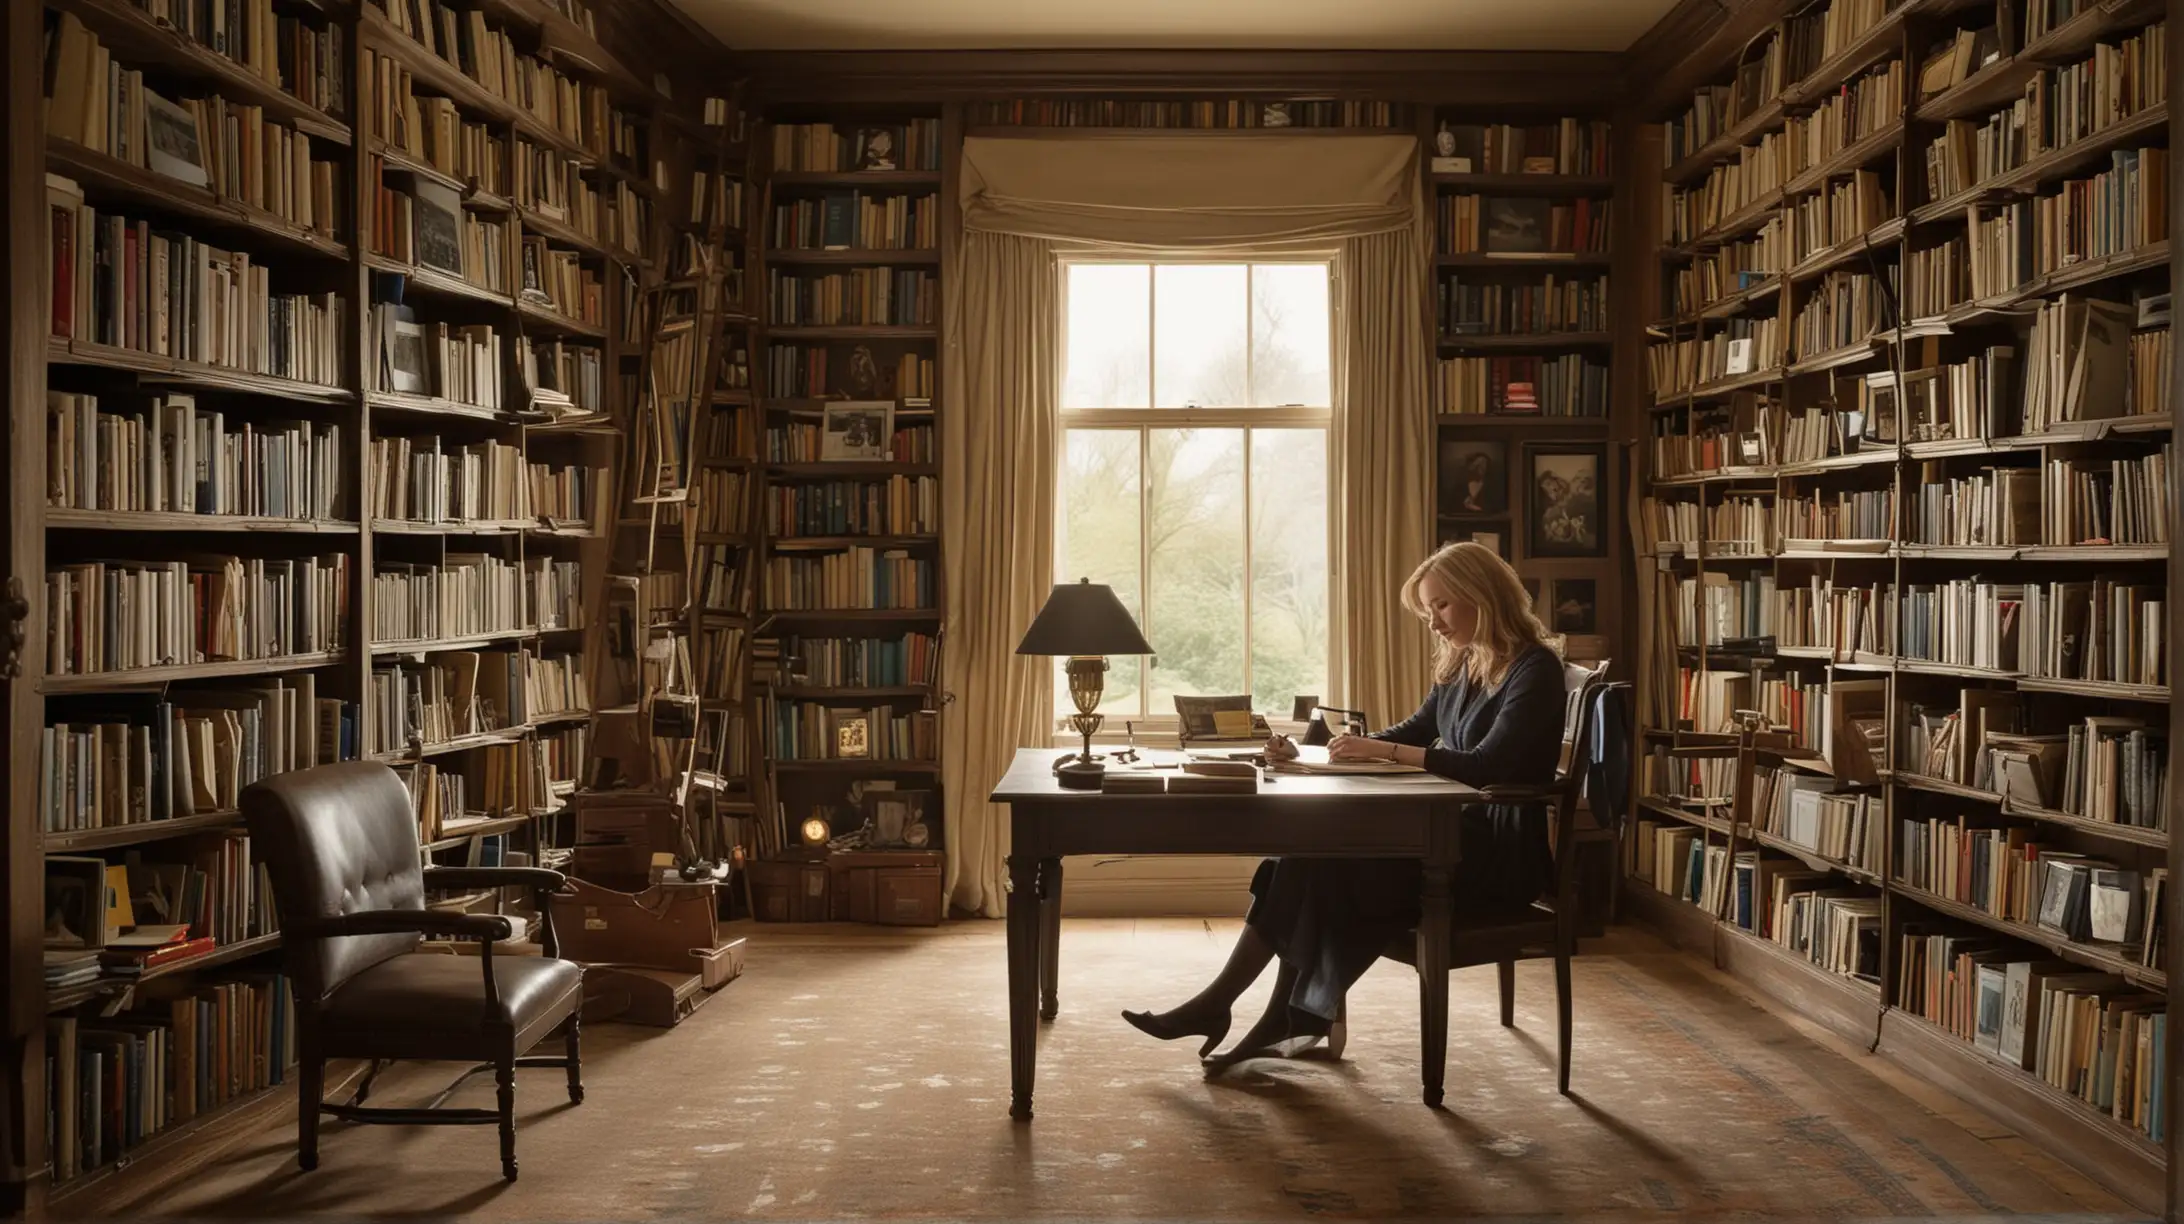 JK Rowling Writing at Sunlit Study Desk Surrounded by Books